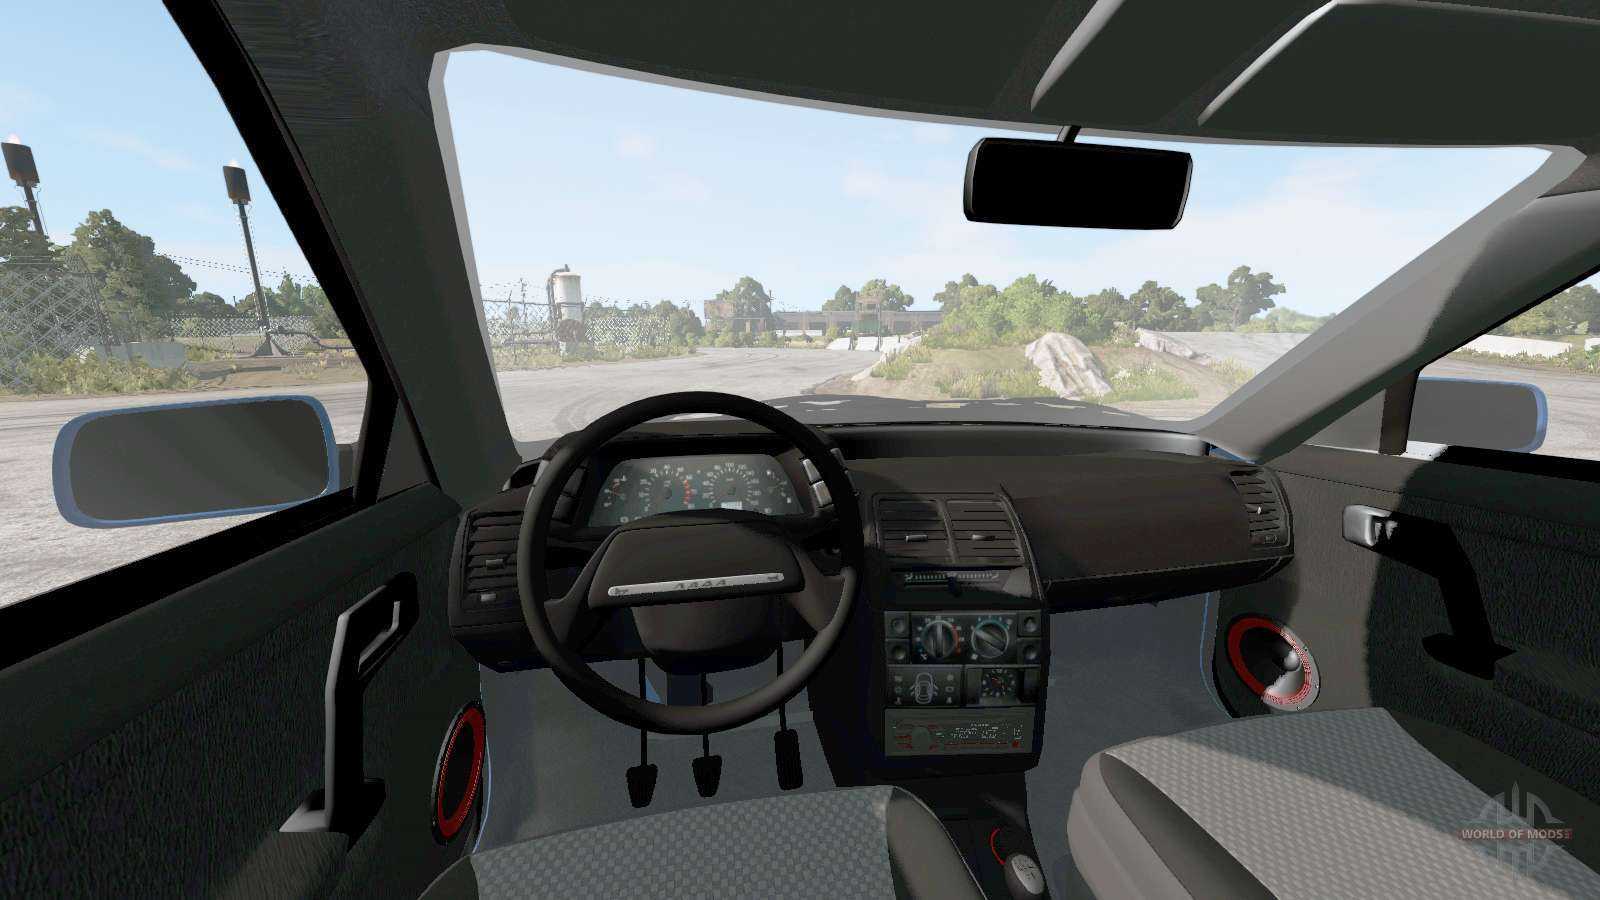 Russian province town v3 0 beamng drive maps beamng drive mods video, mp3, & image - ariaatr.com download